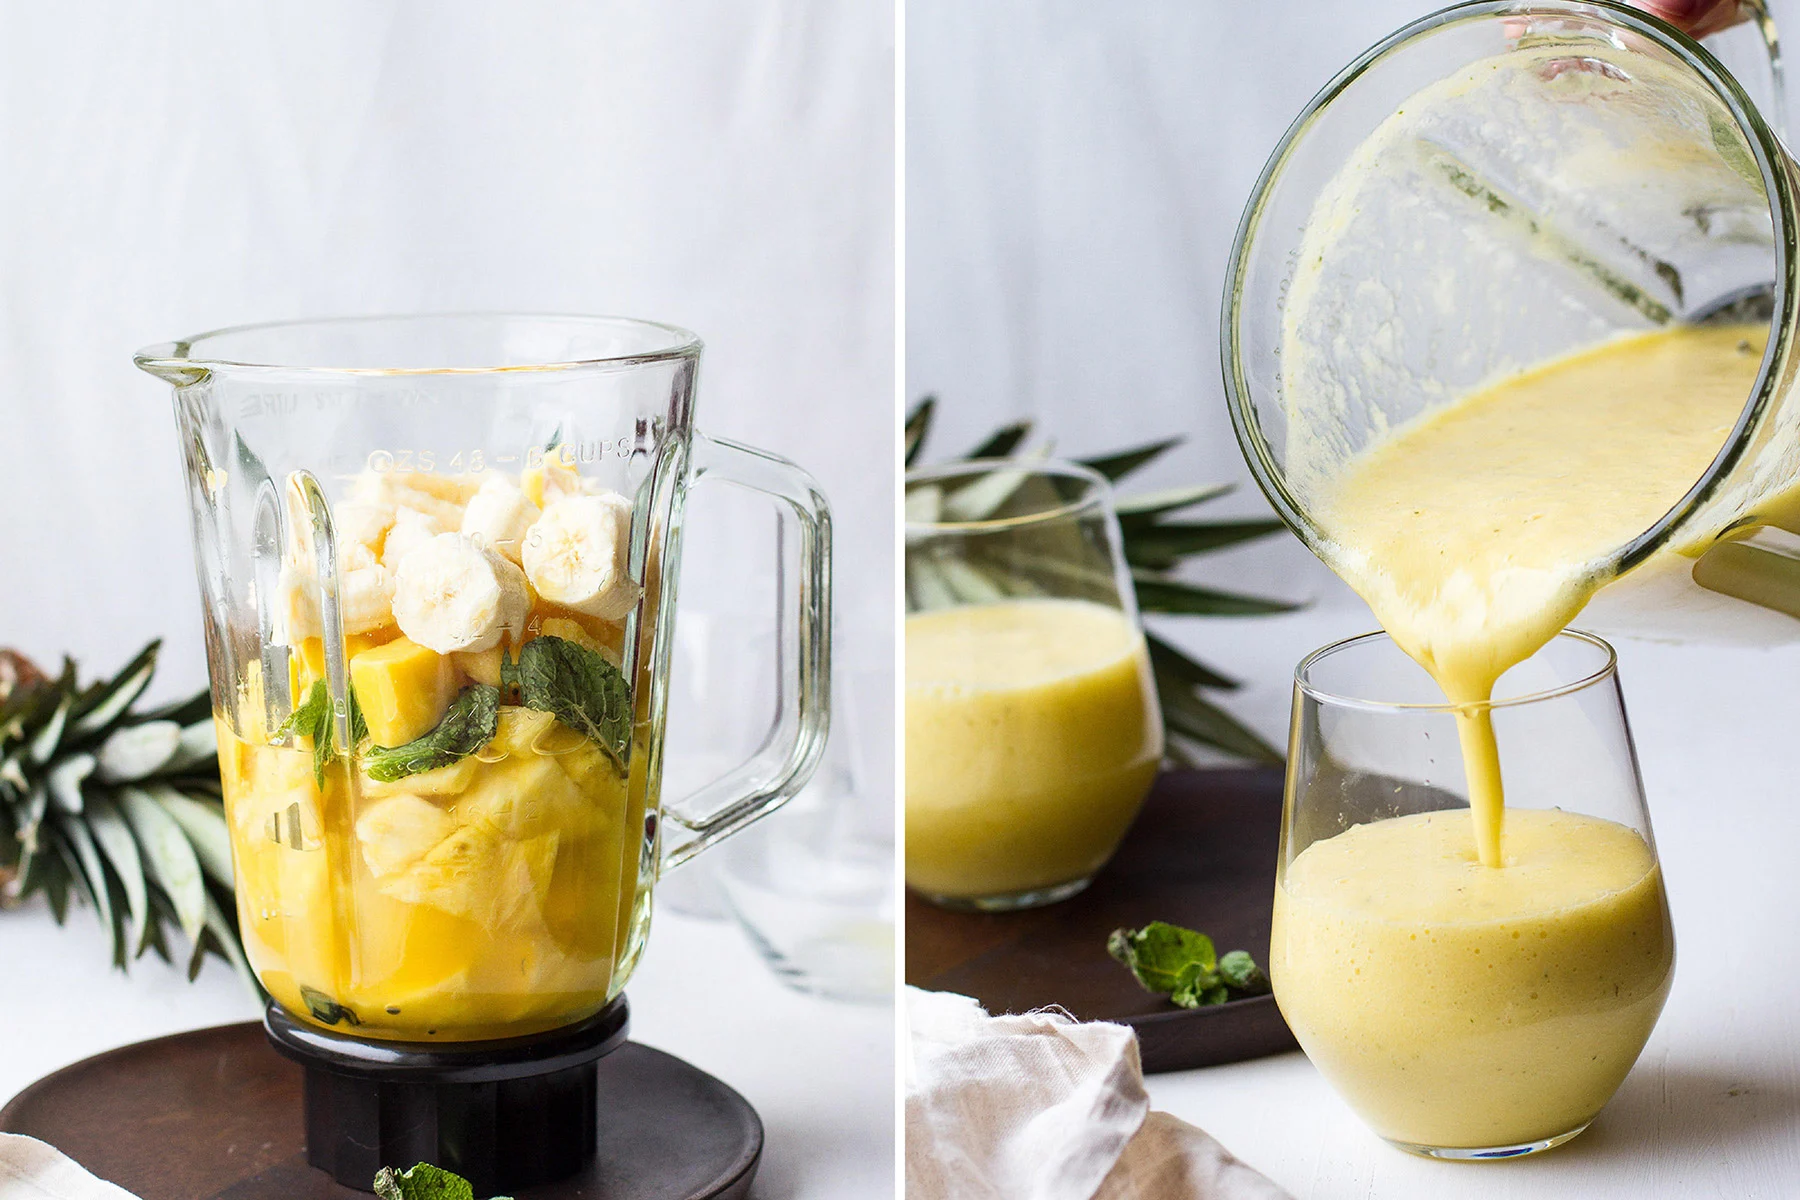 A diptych with one image of the ingredients in a blender and one pouring the smoothie from the blender and into a glass.